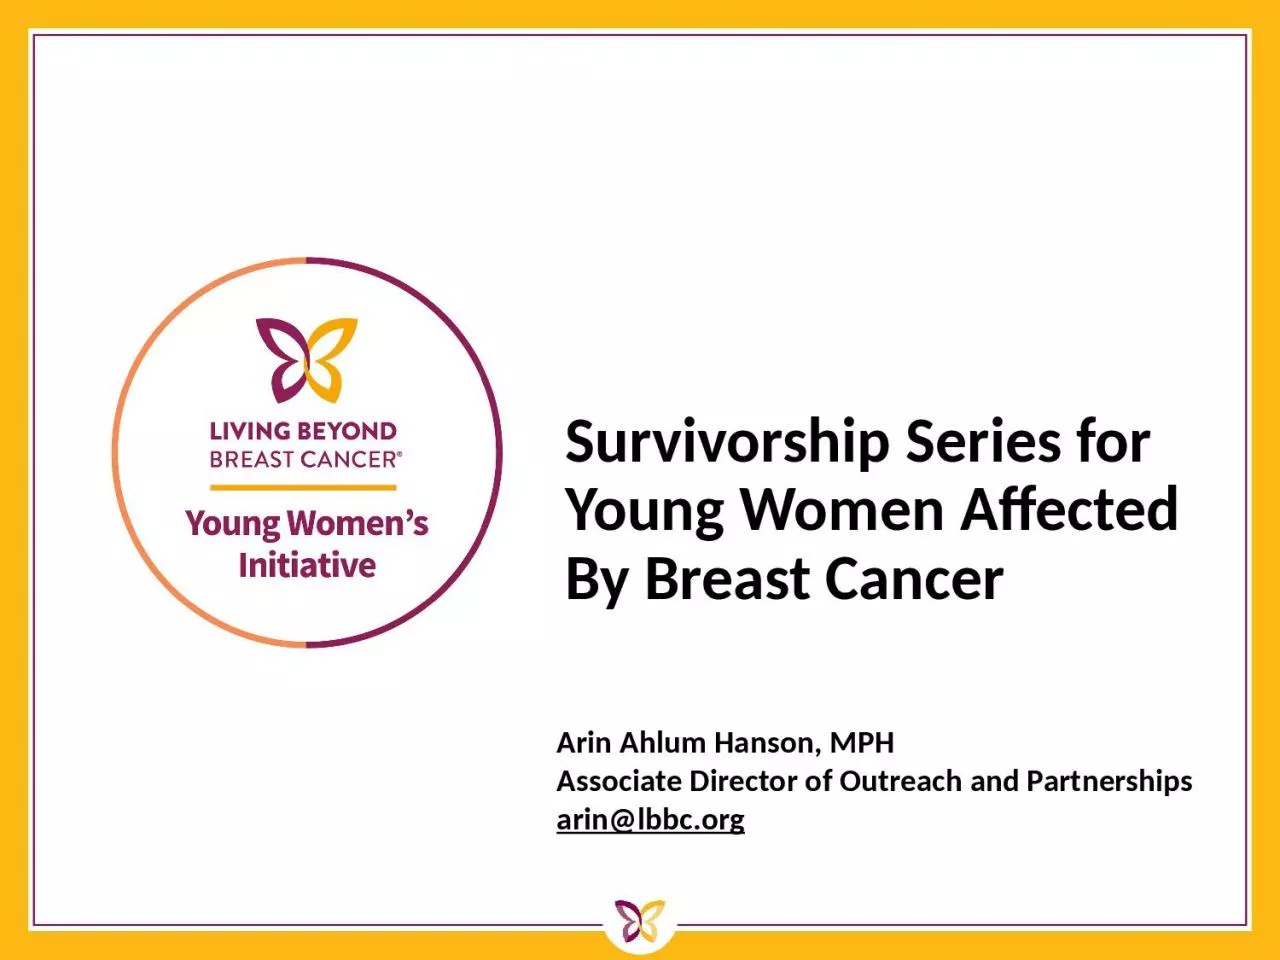 Survivorship Series for Young Women Affected By Breast Cancer